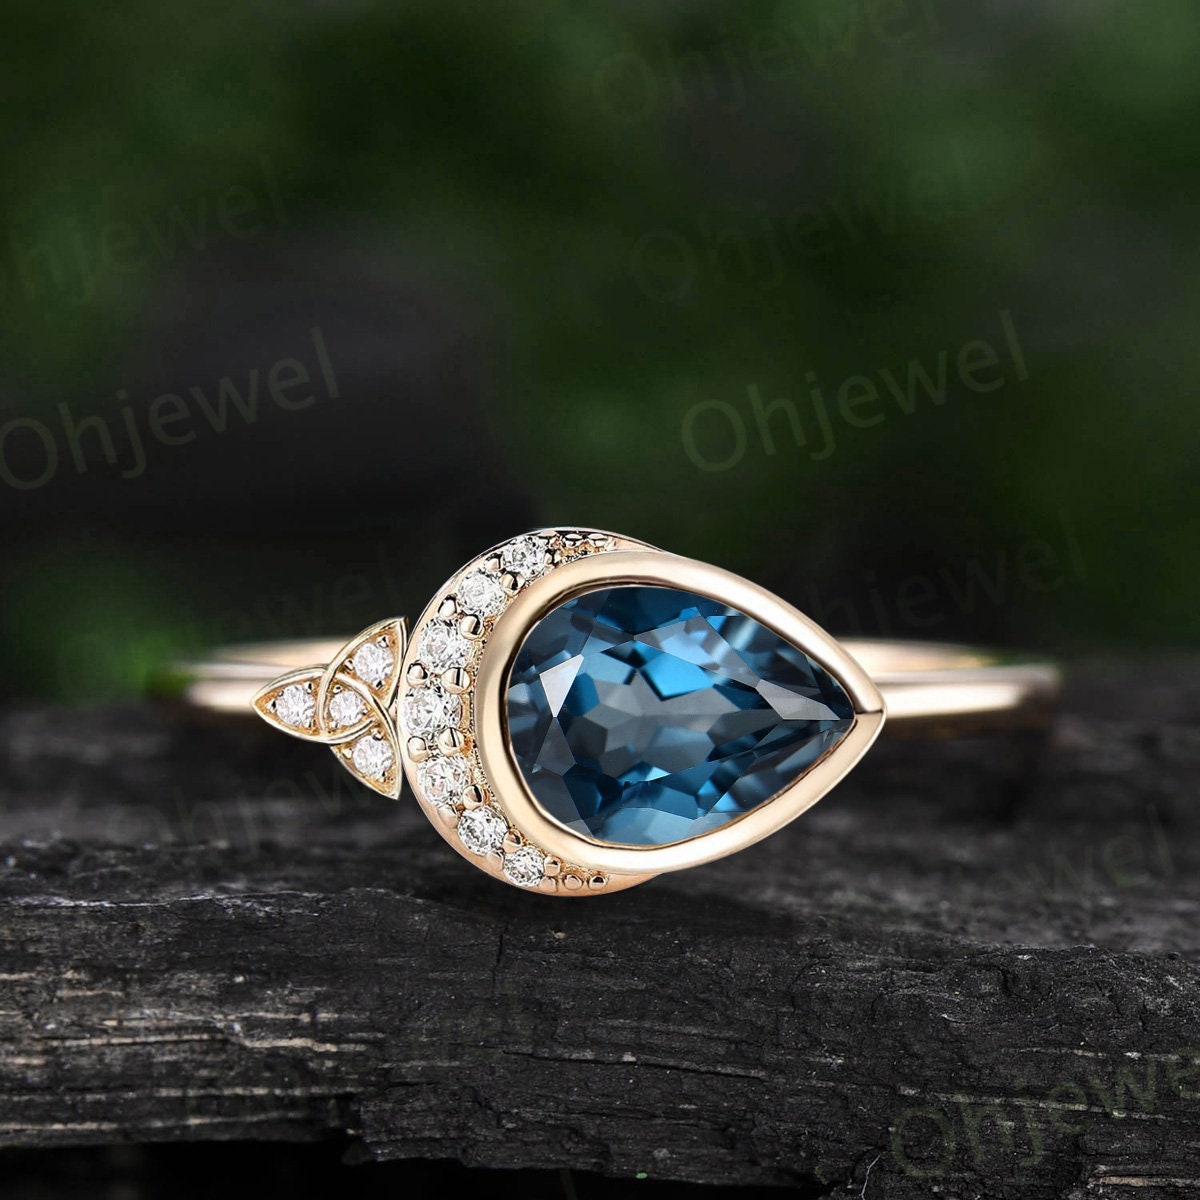 Pear shaped London blue topaz ring vintage moon bezel unique engagement ring women yellow gold celtic knot diamond anniversary ring gift